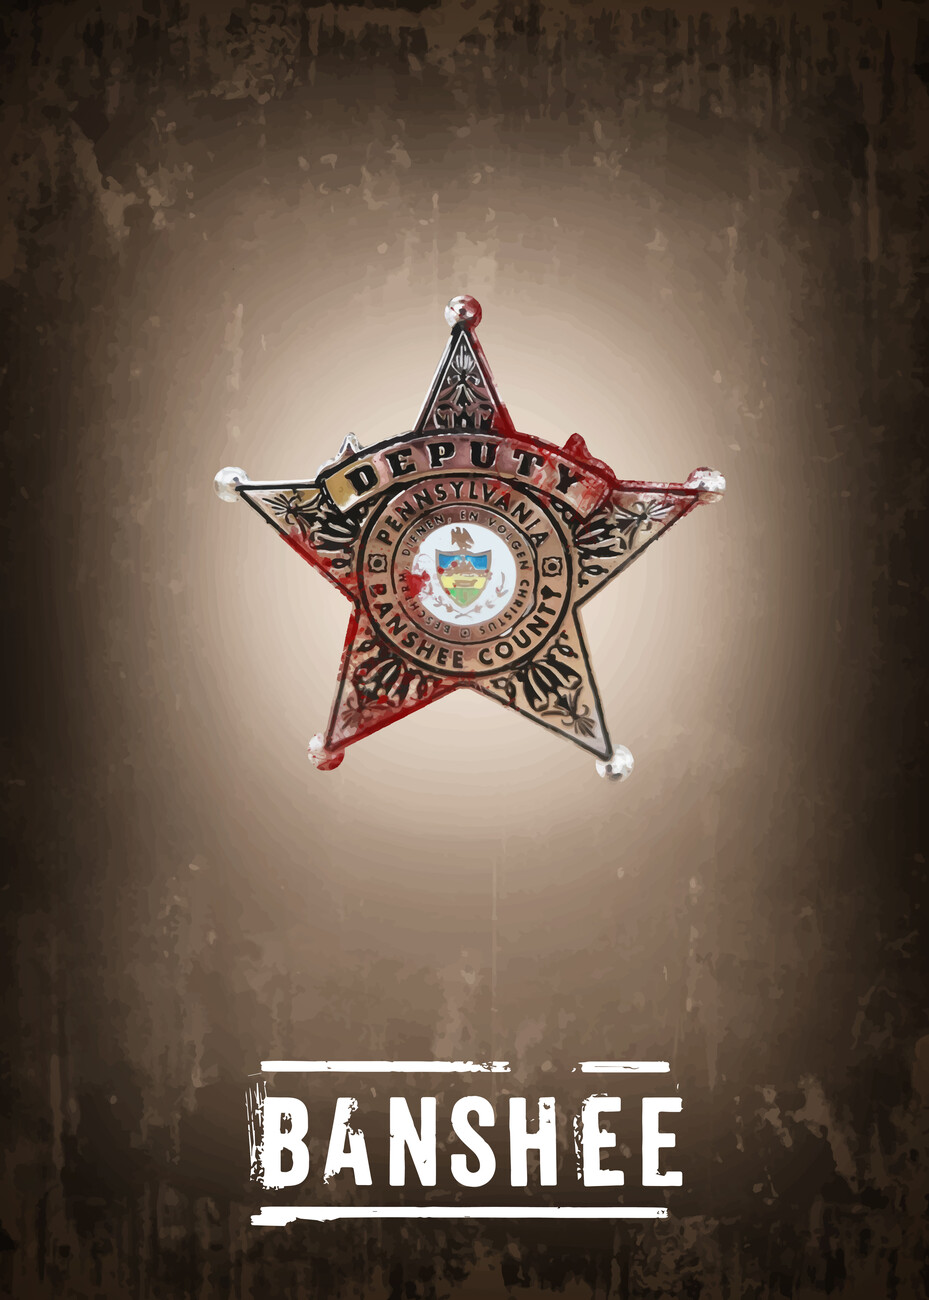 Free download Hd Wallpapers County Sheriff 554 X 600 16 Kb Jpeg HD  Wallpapers 1920x1080 for your Desktop Mobile  Tablet  Explore 45  Police Badge Wallpaper  Police Car Wallpapers Ferrari Badge Wallpaper  Military Police Wallpaper